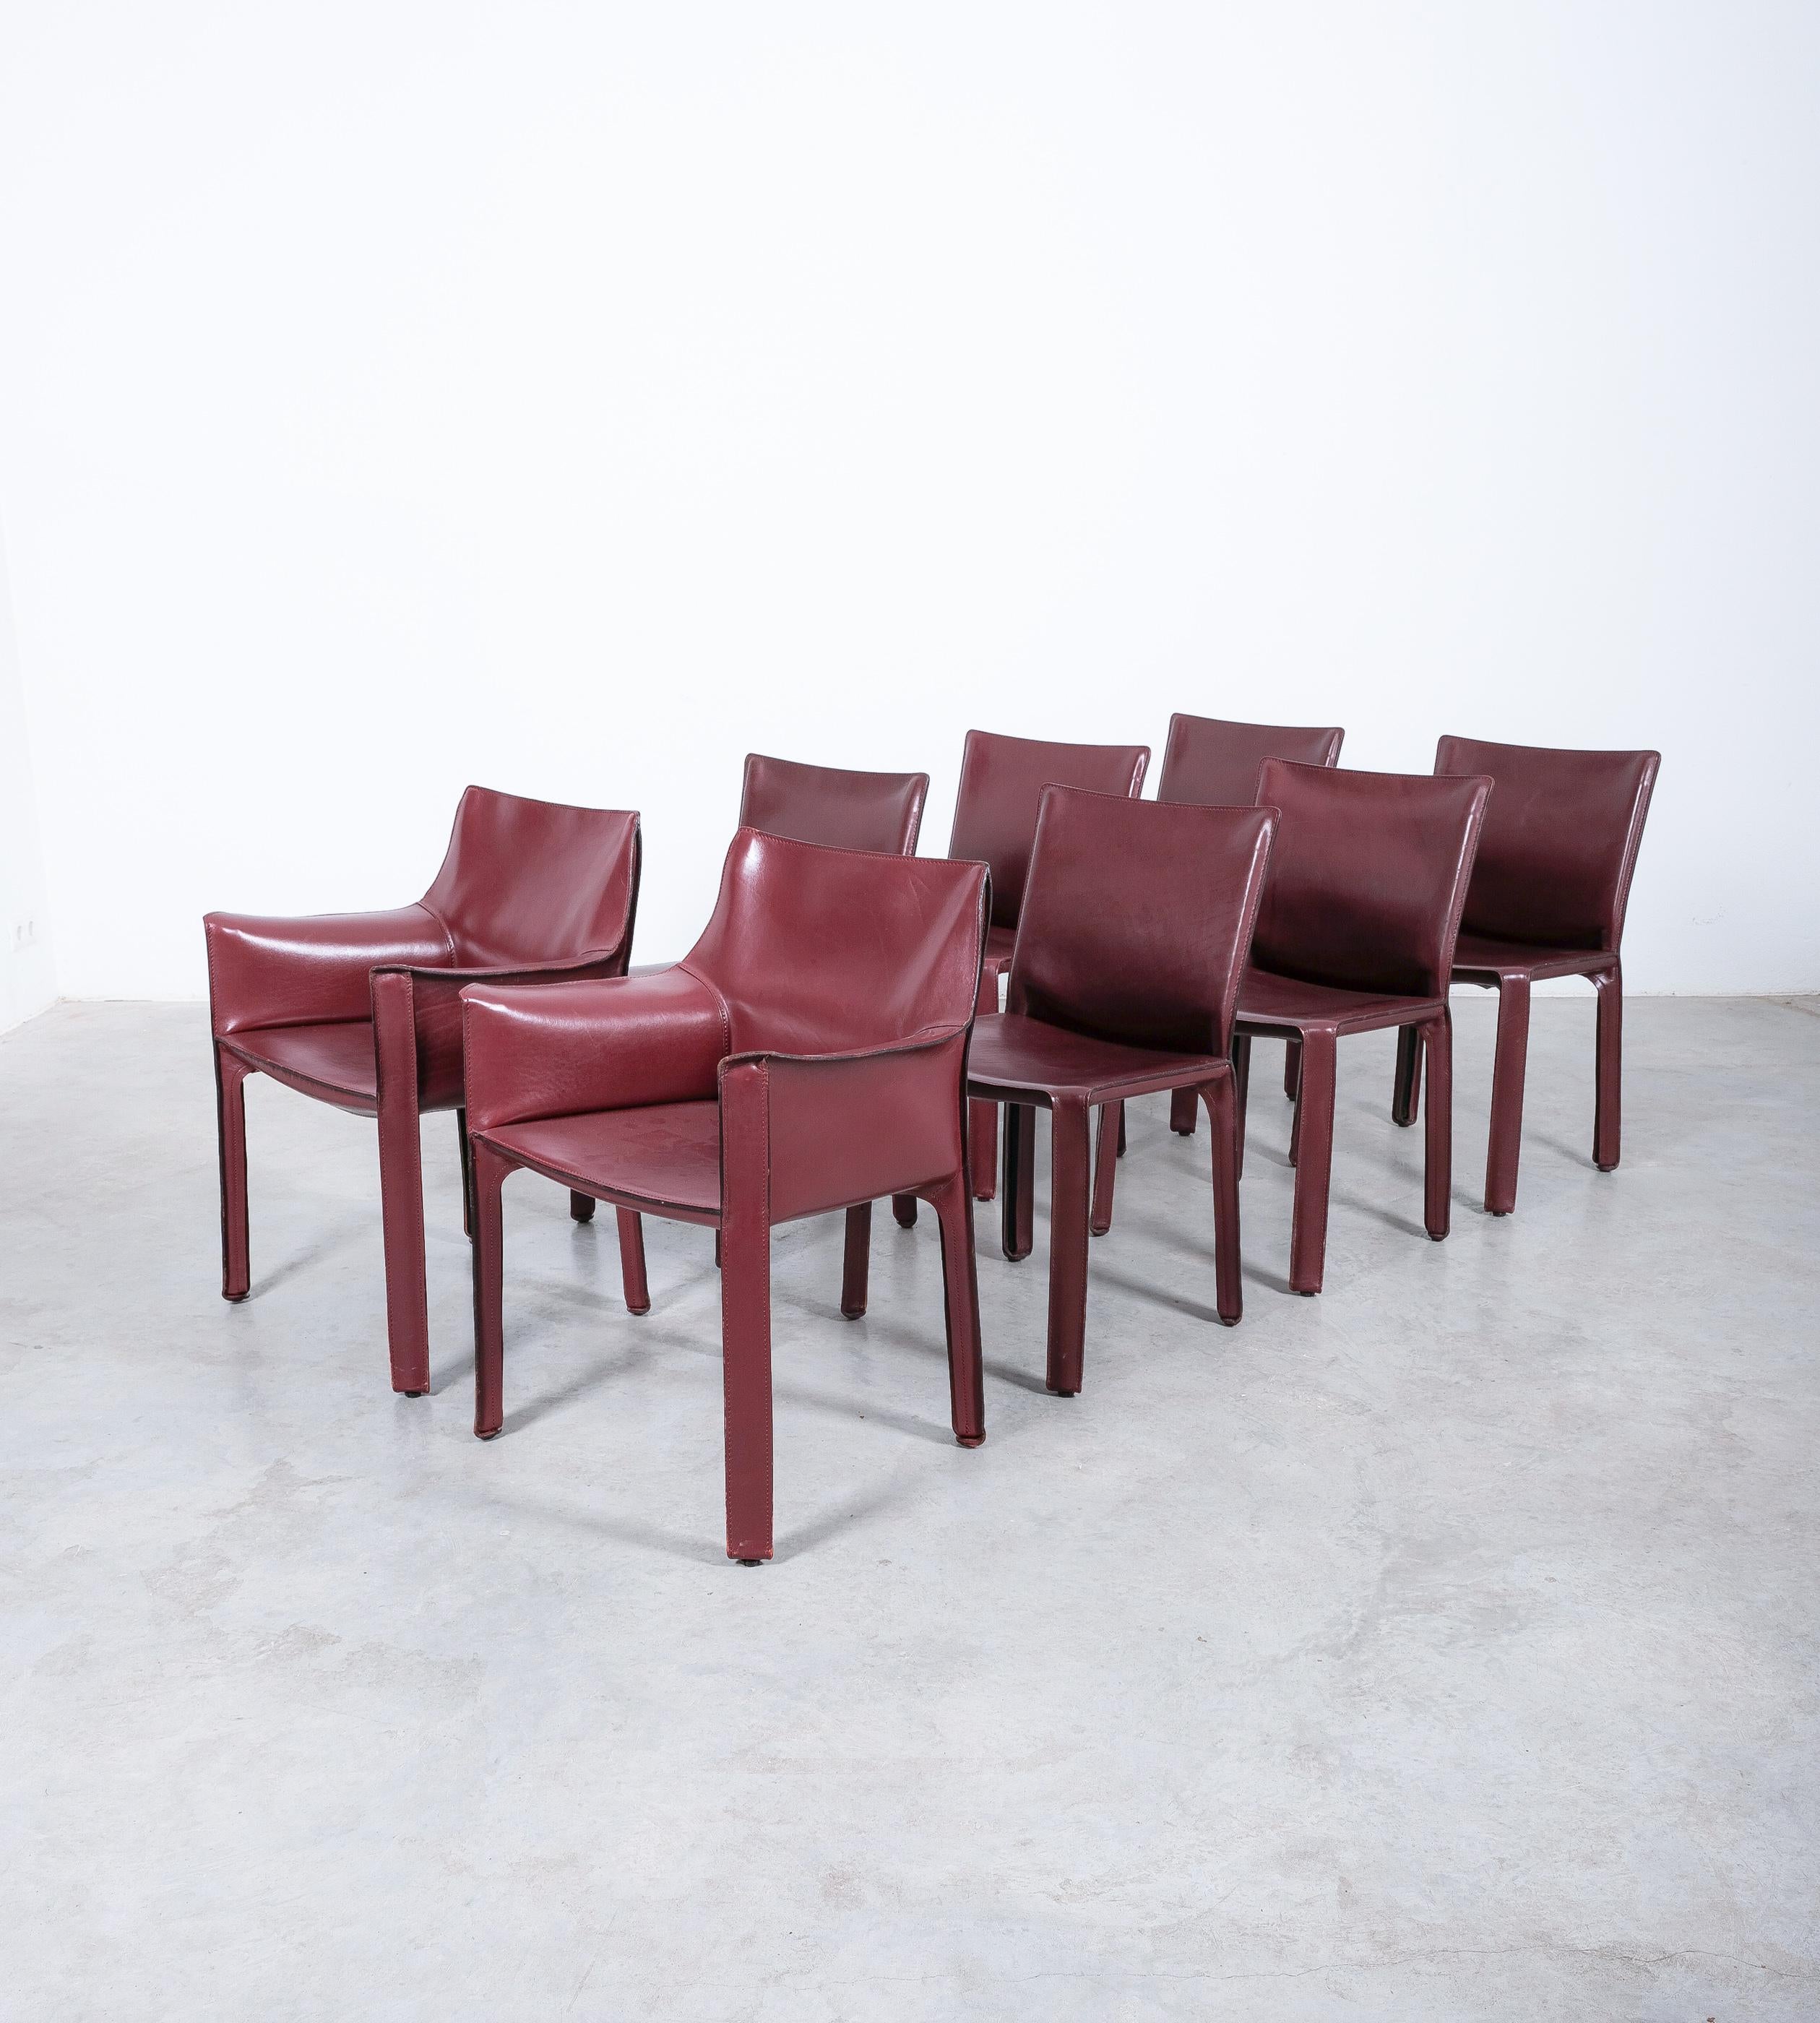 Mario Bellini Cassina Cab 412, 413 Set of Ten 9 Red Leather Dining Chairs 4